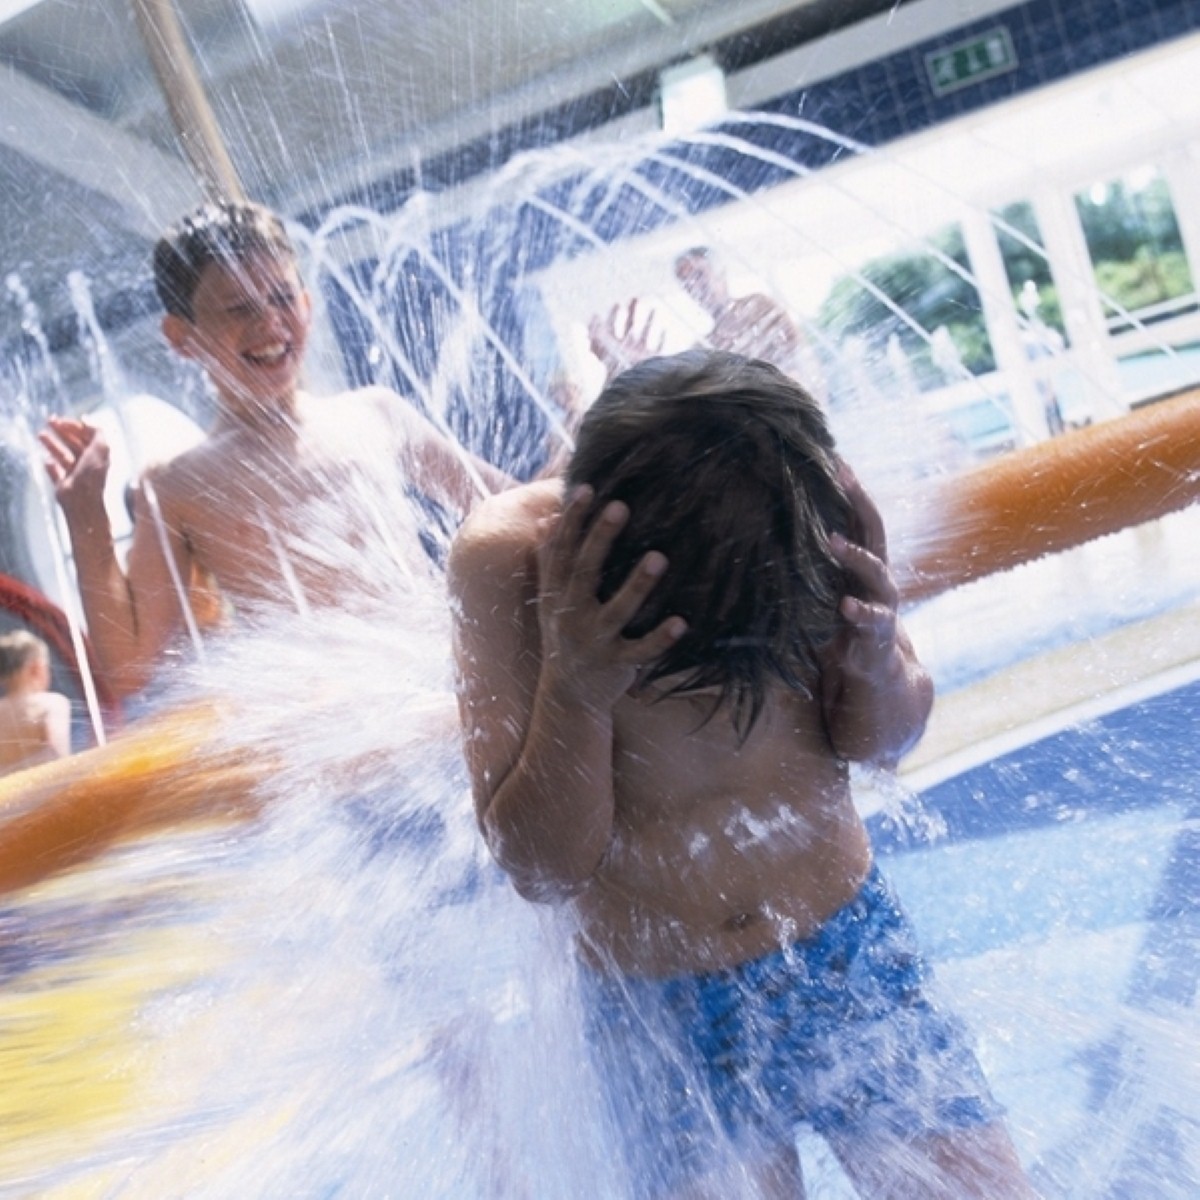 The holiday parks are popular with families looking for a trip away